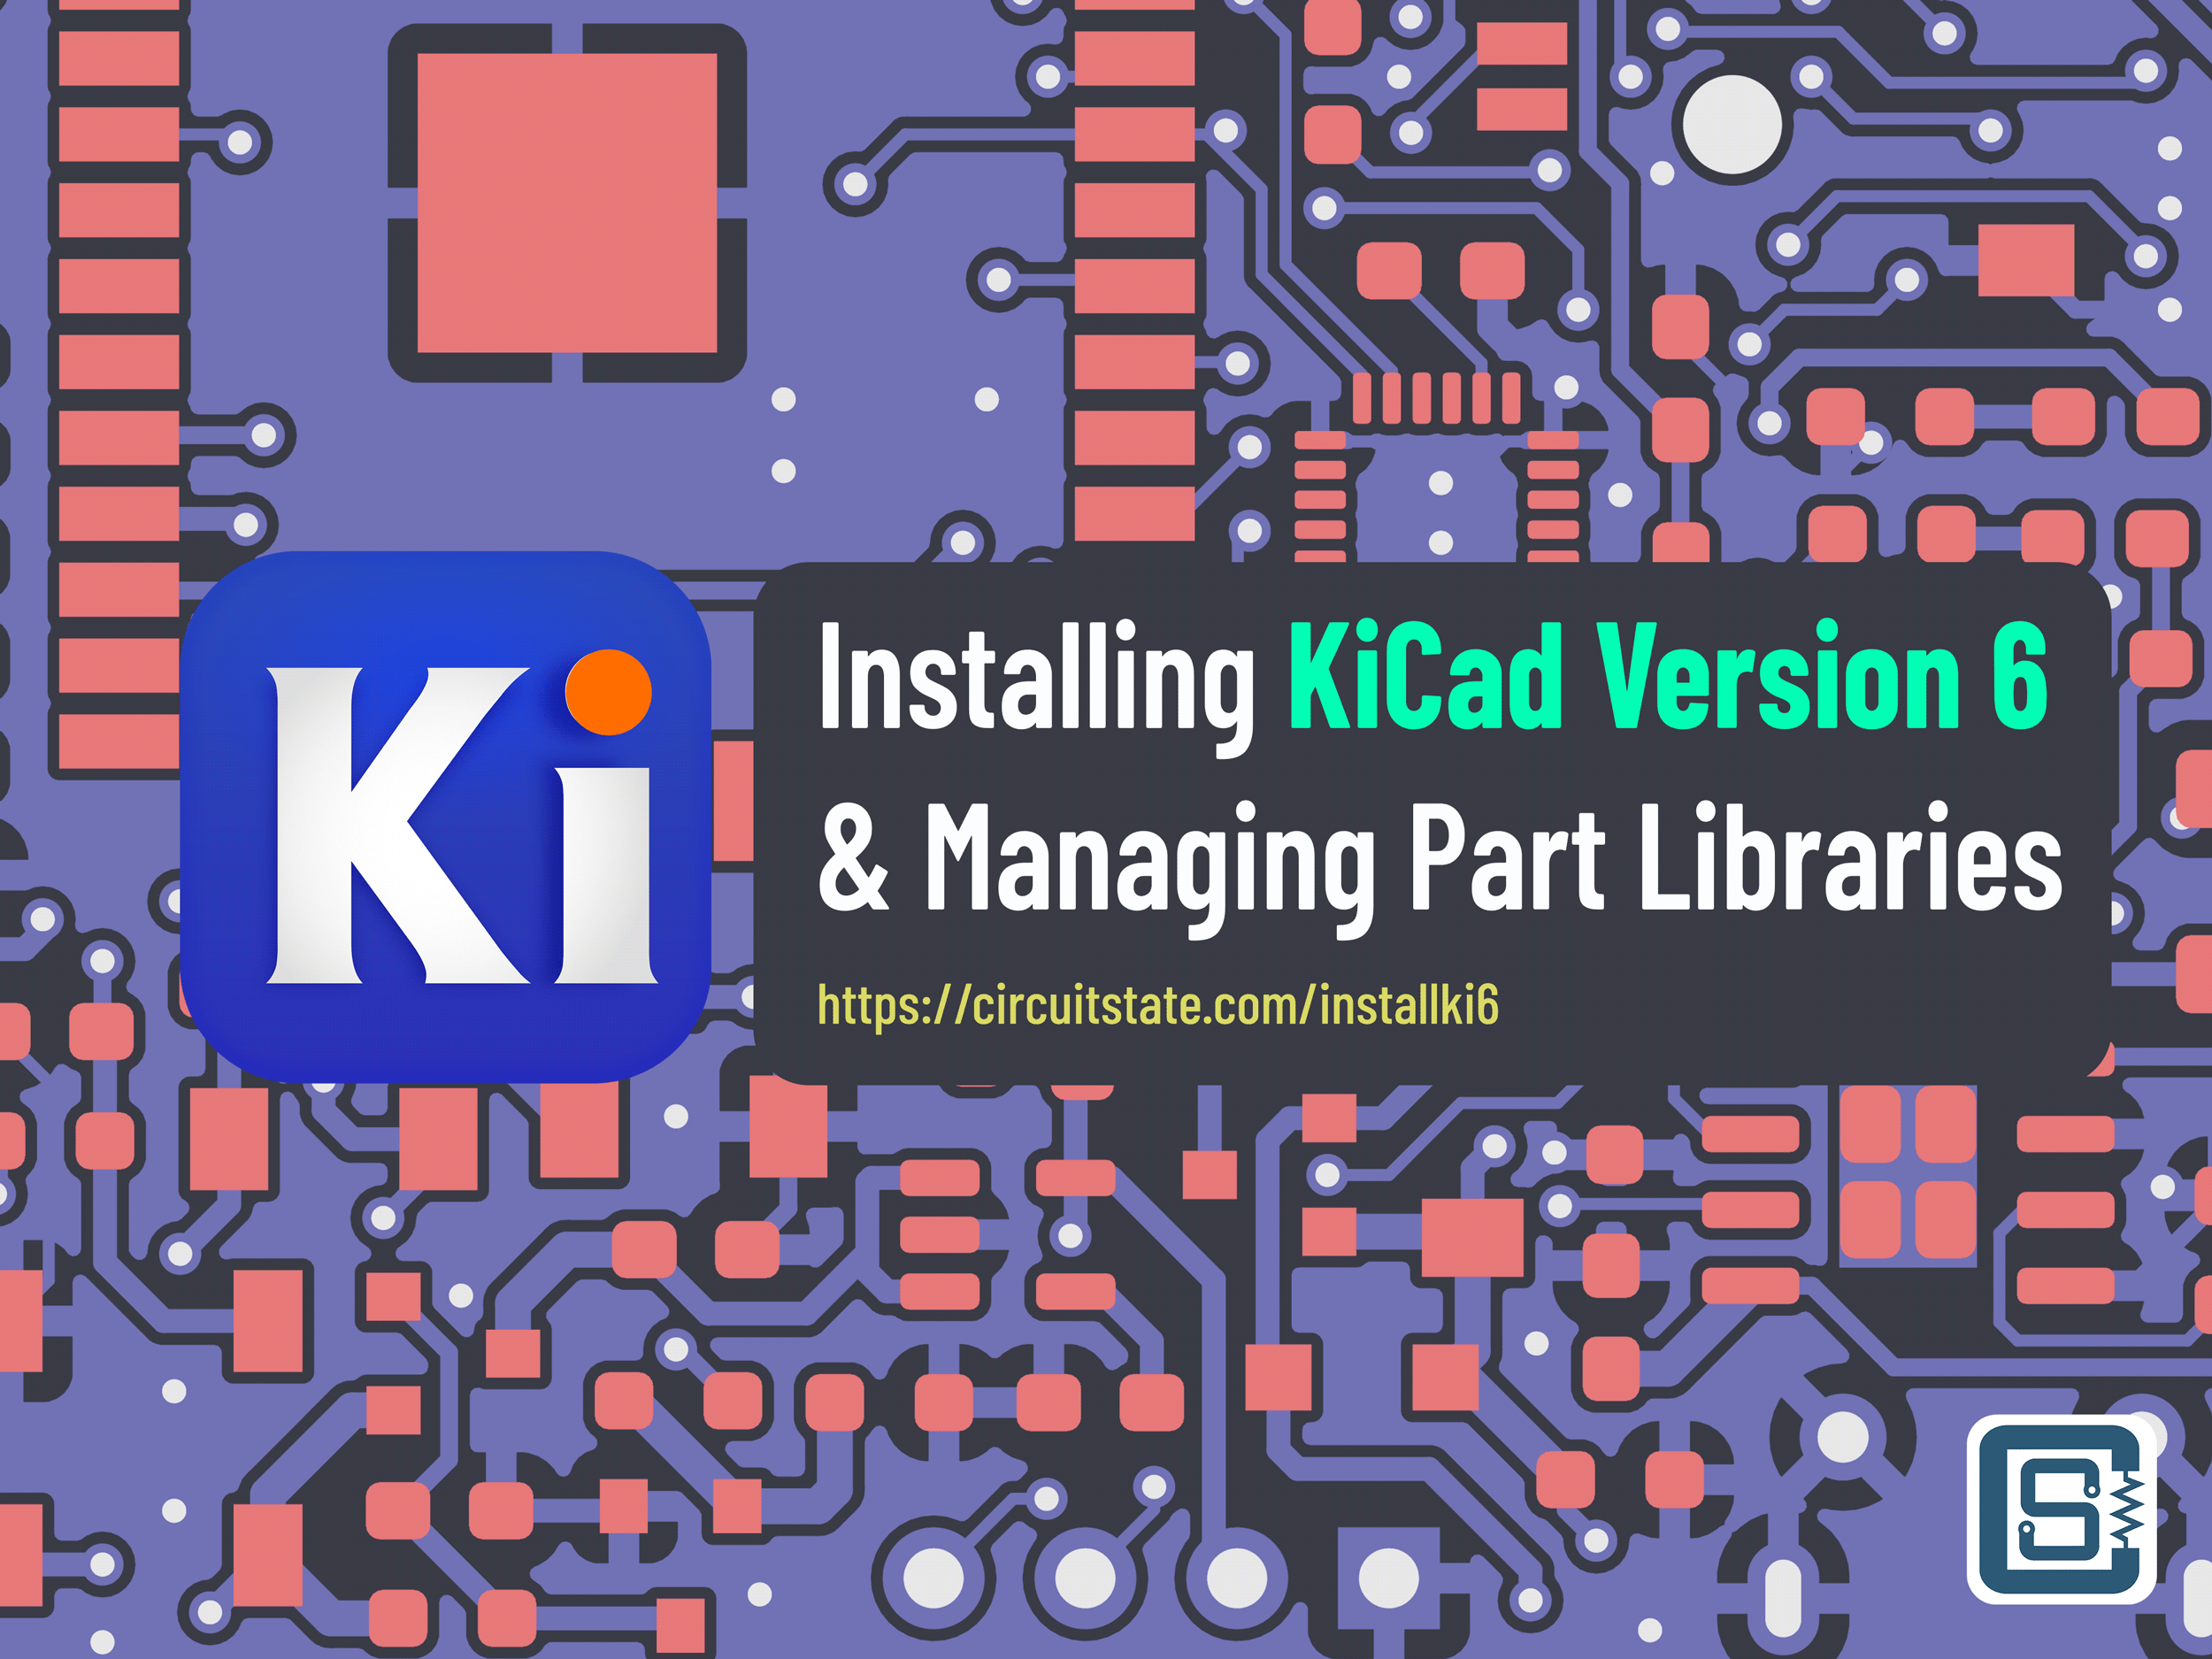 How-to-Install-KiCad-Version-6-and-Organize-Part-Libraries-Featured-Image-01-2-1